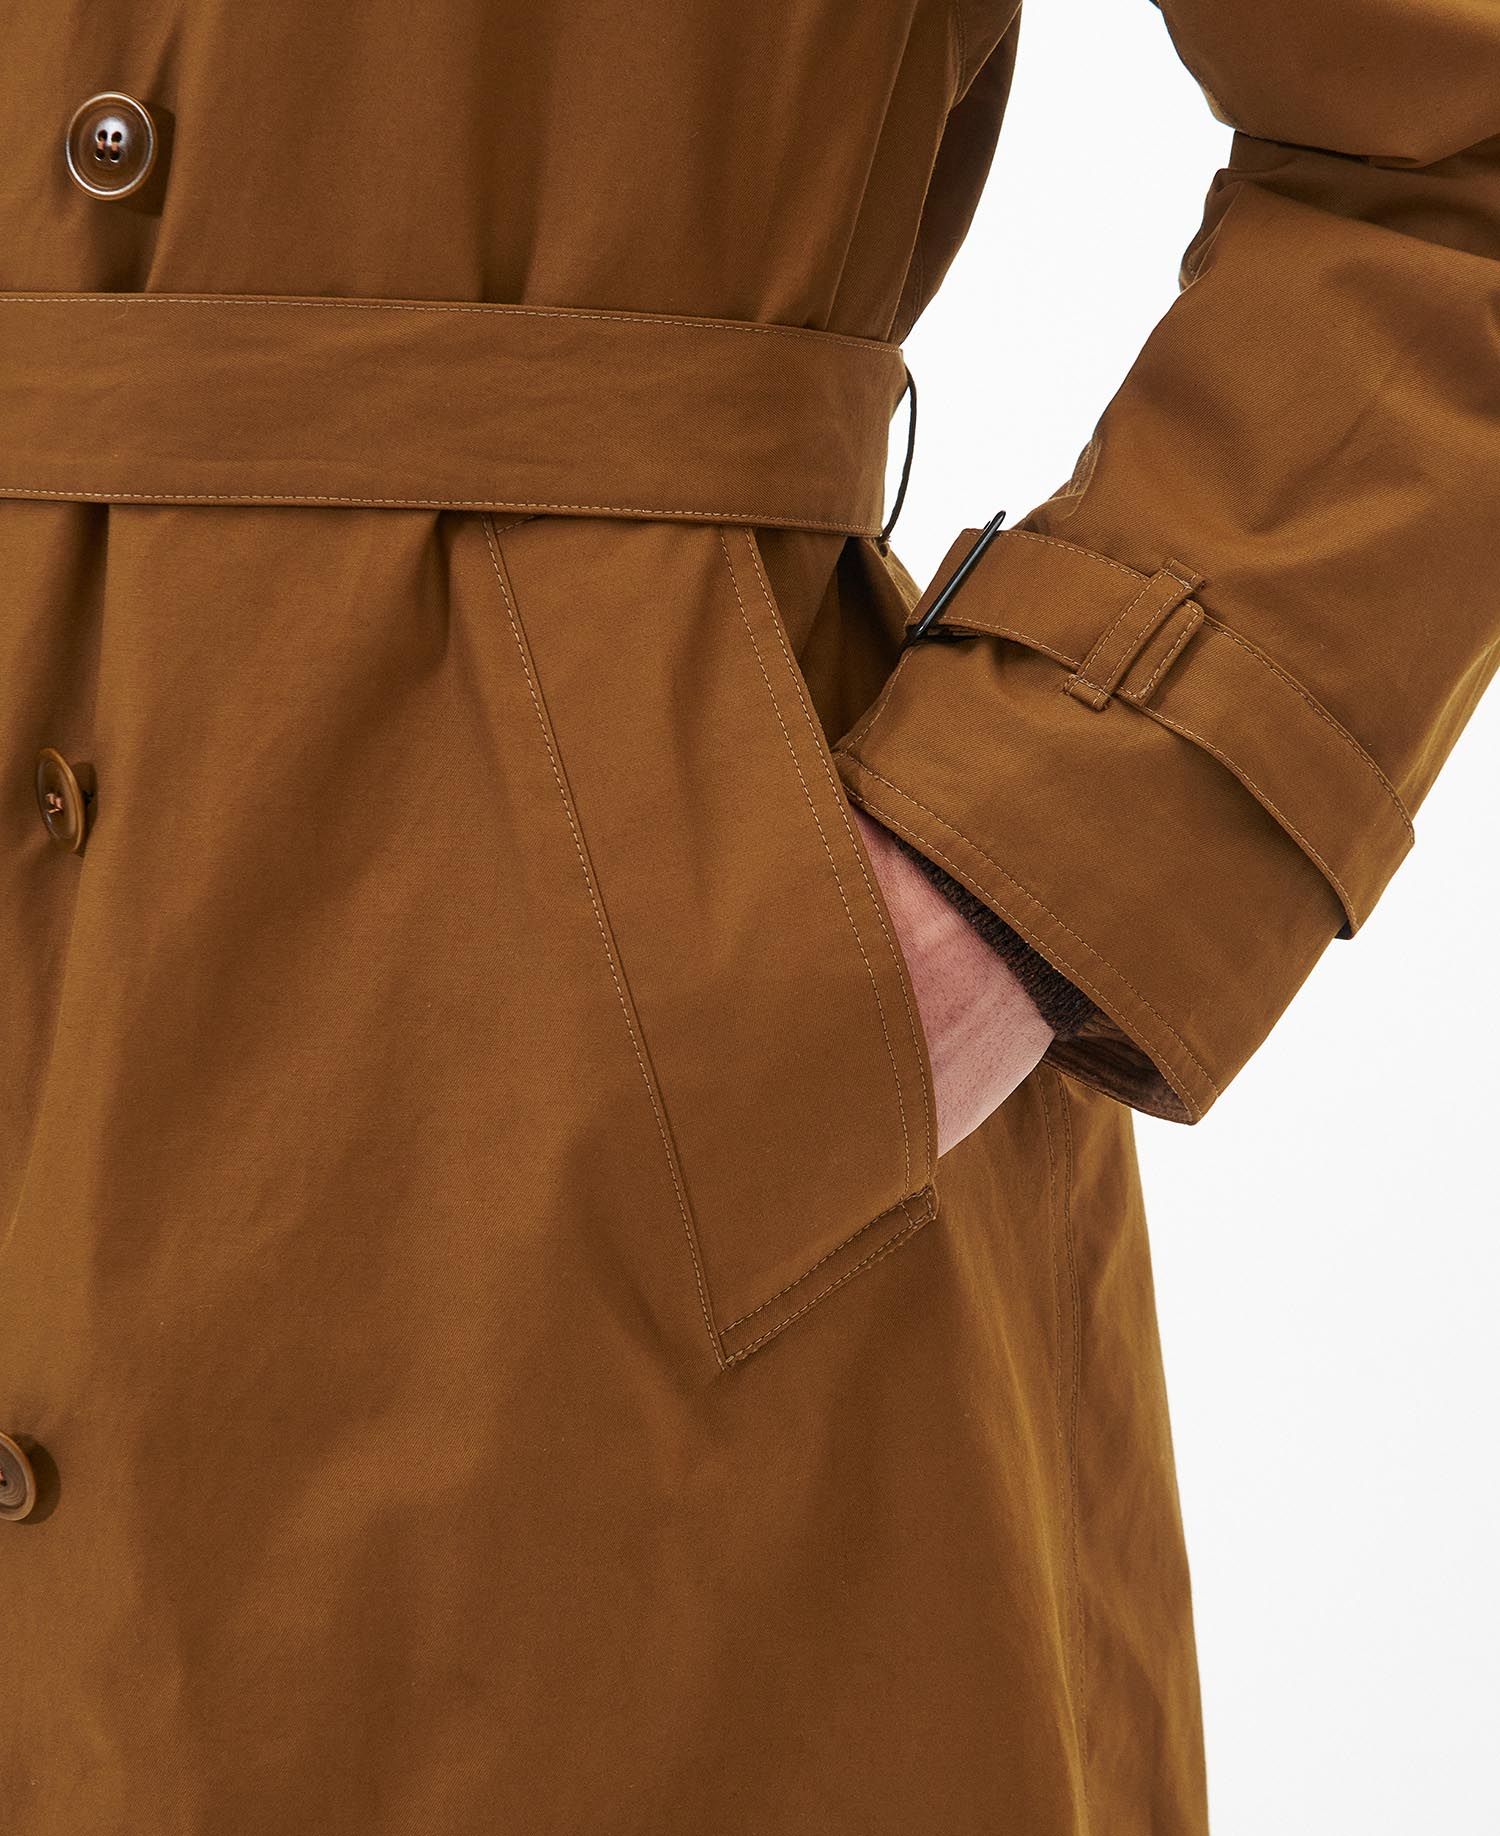 Shop the Barbour Whitley Casual Trench Coat in Brown today